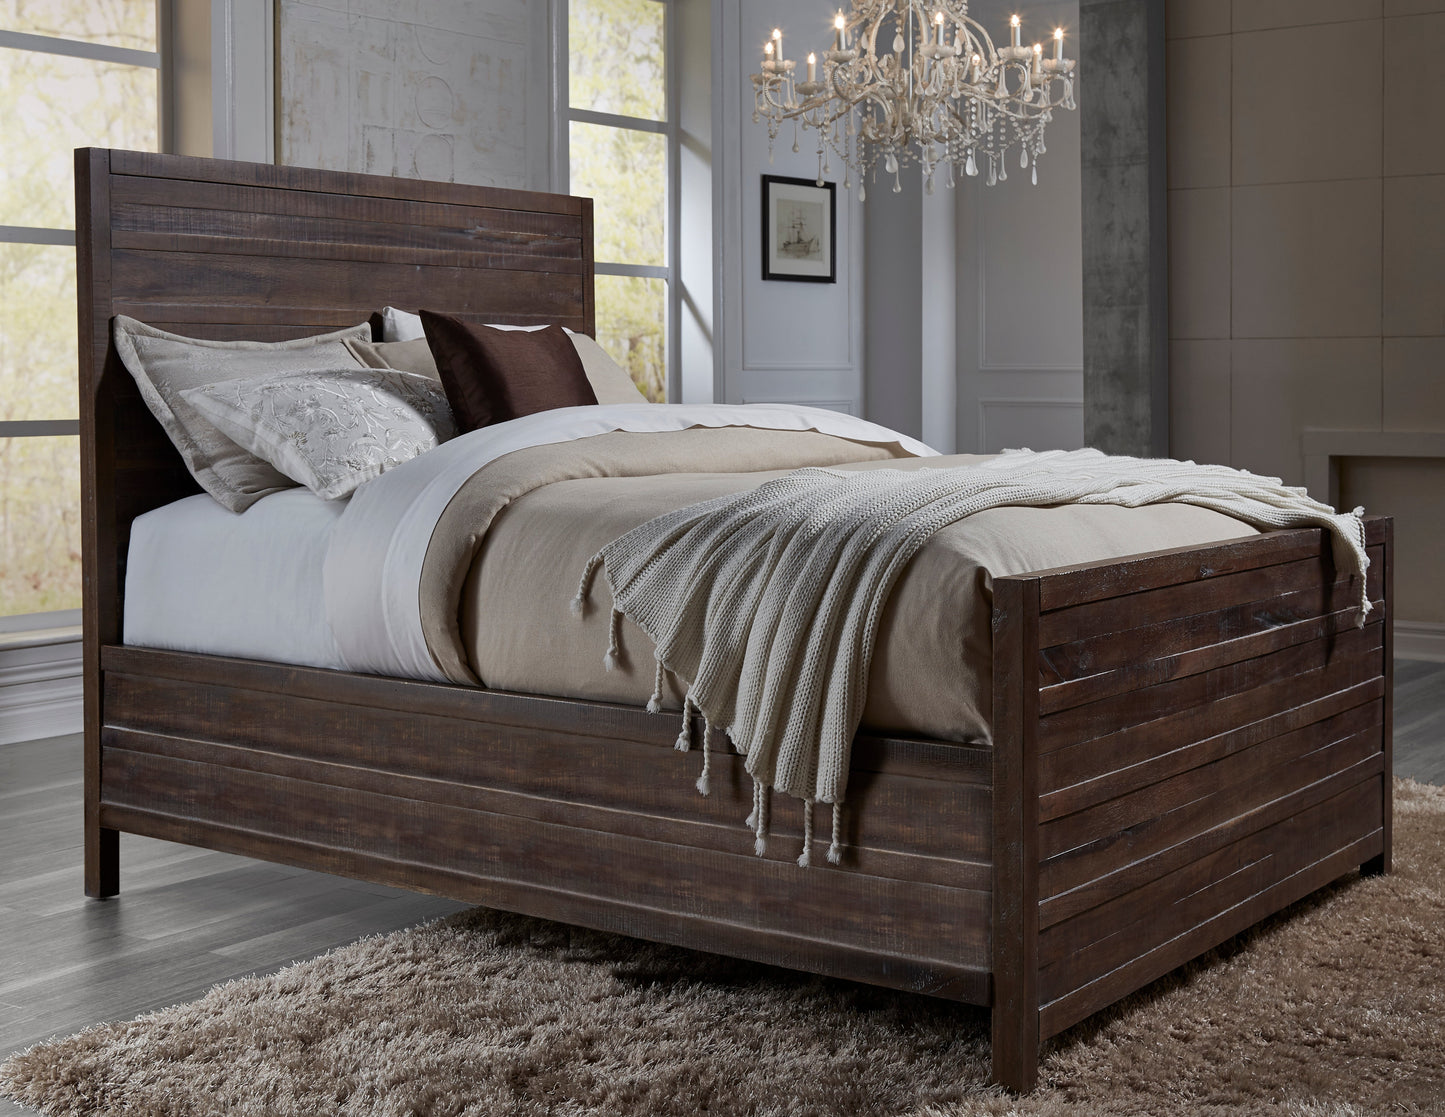 Modus Townsend Cal King Platform Bed in Java